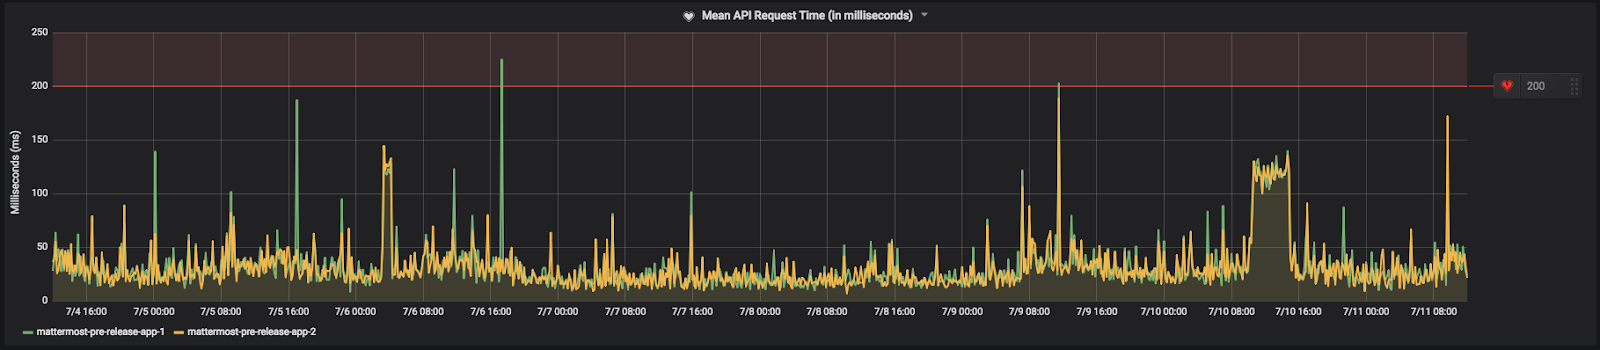 Mean API Request Time